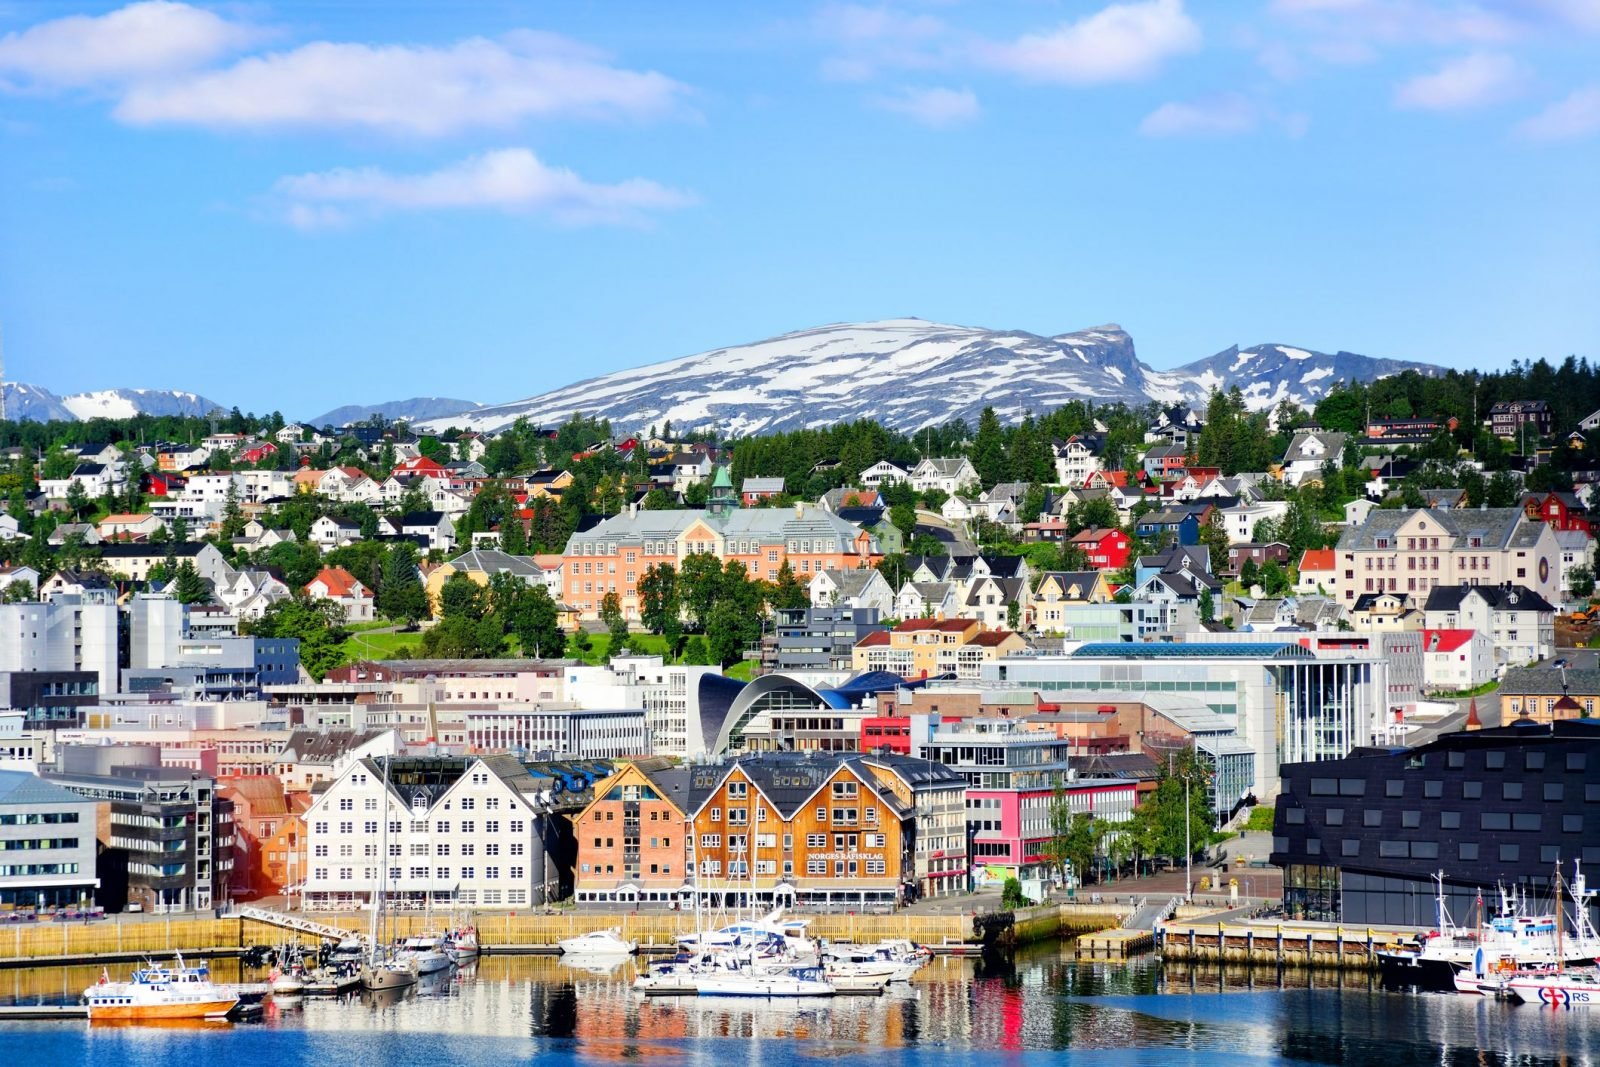 Colourful Tromsø, the world's northernmost city, in Norway.